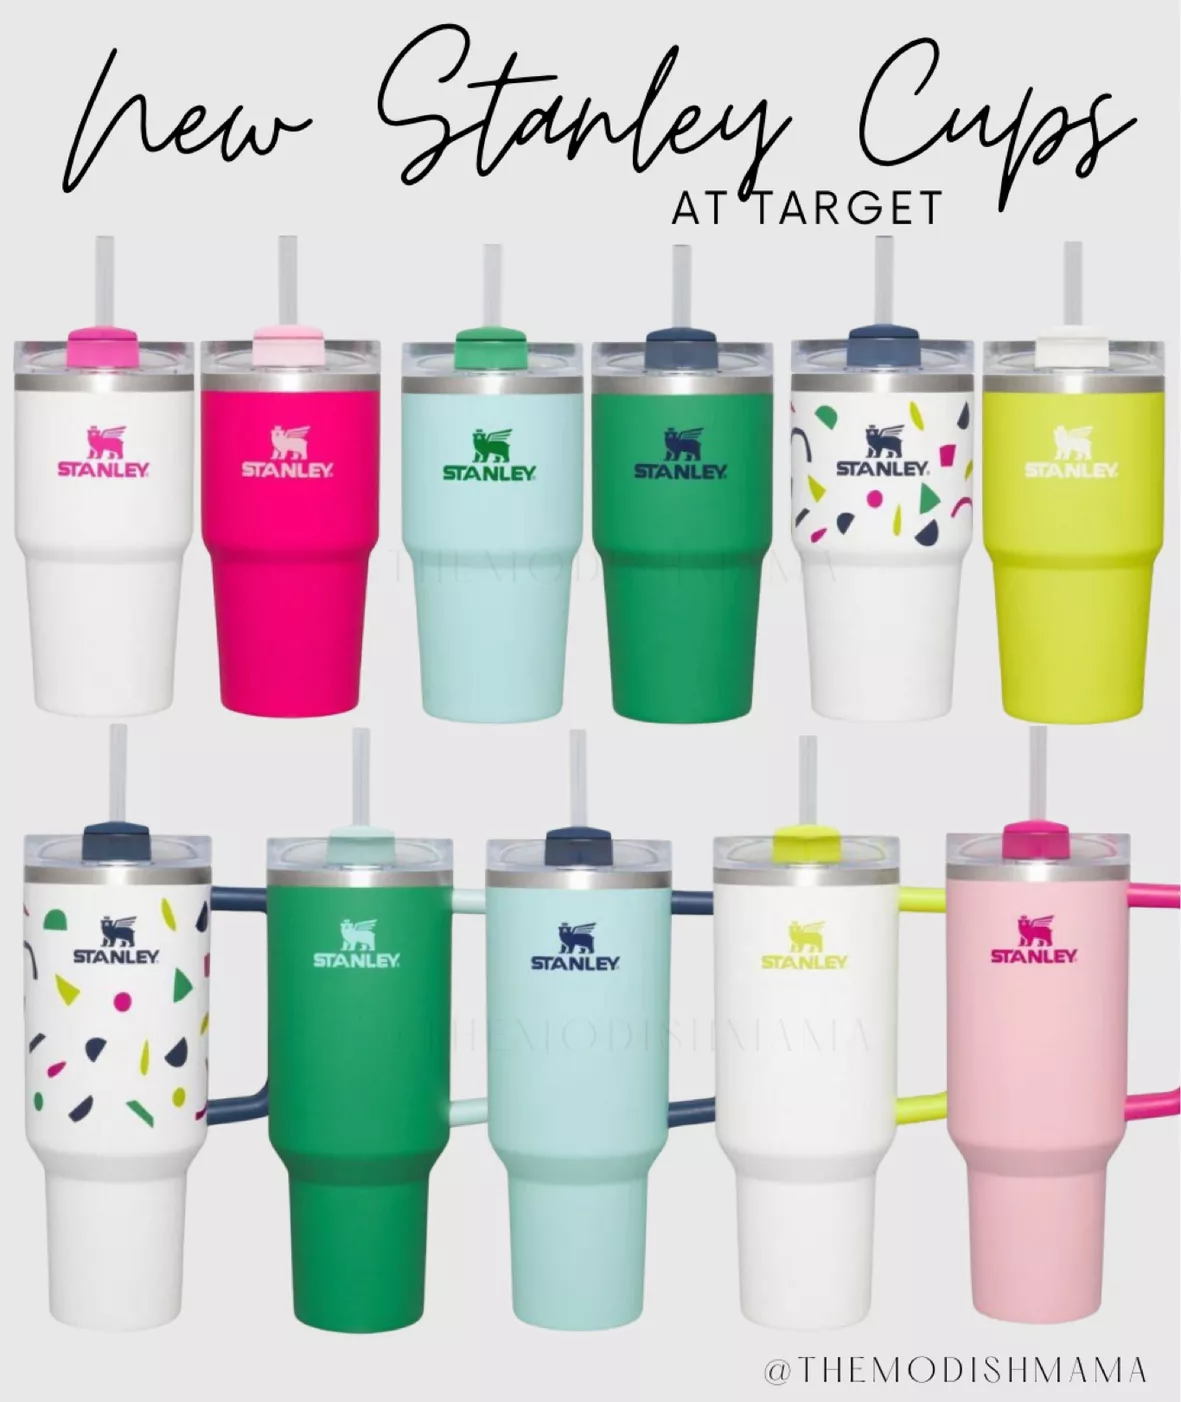 Have you seen the NEW Stanley cups for kids at Target?! I could not be, Stanley  Cup